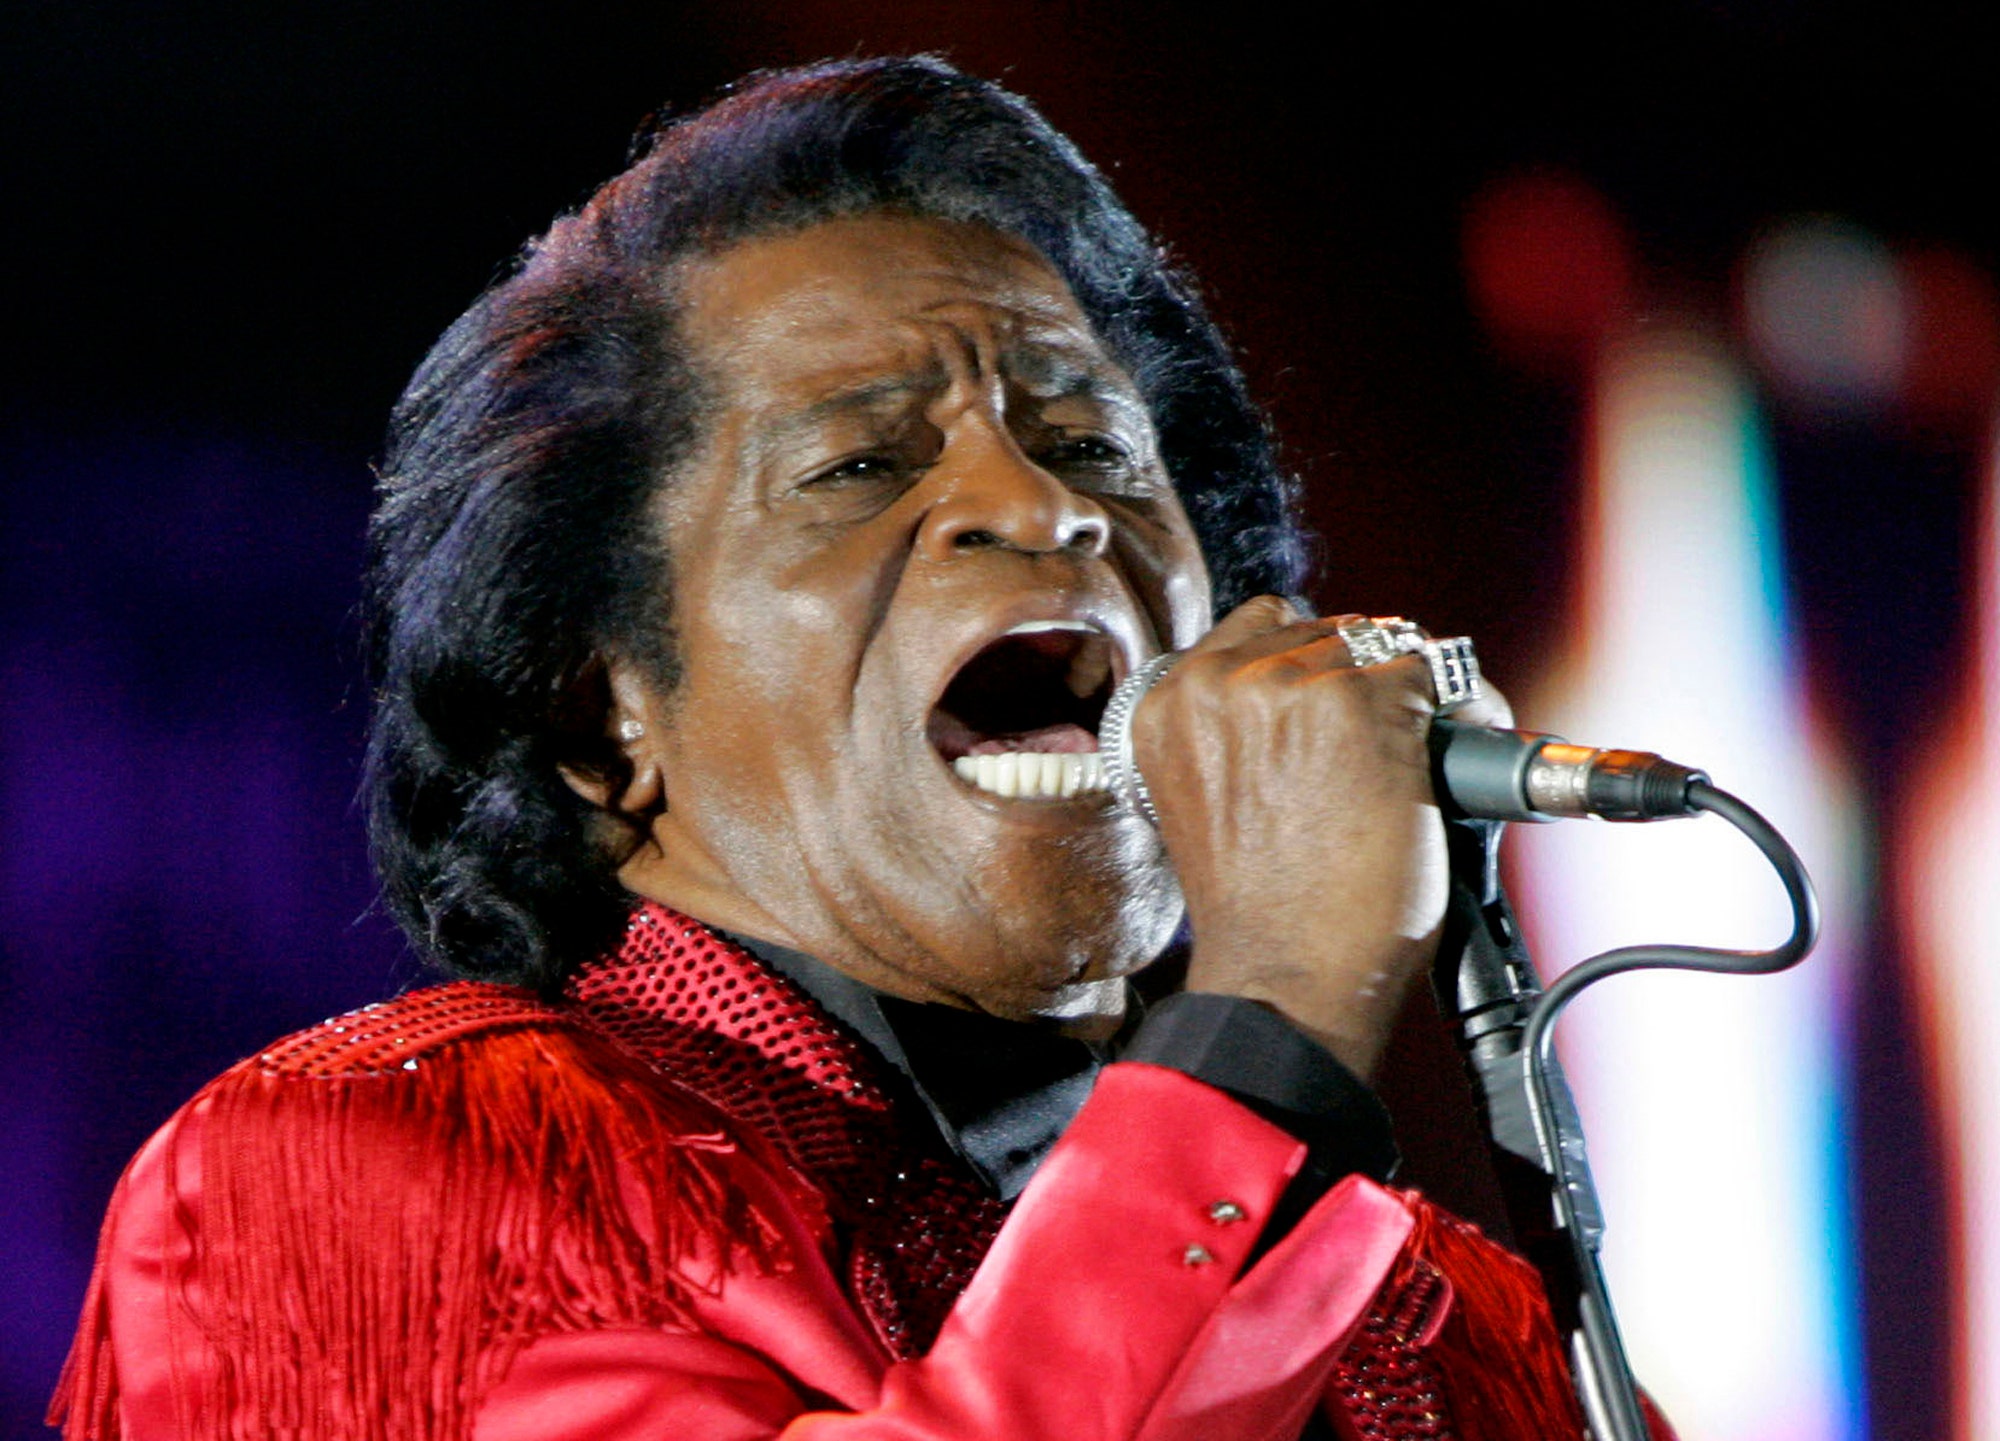 James Brown’s estate almost settled nearly 15 years after his death: report